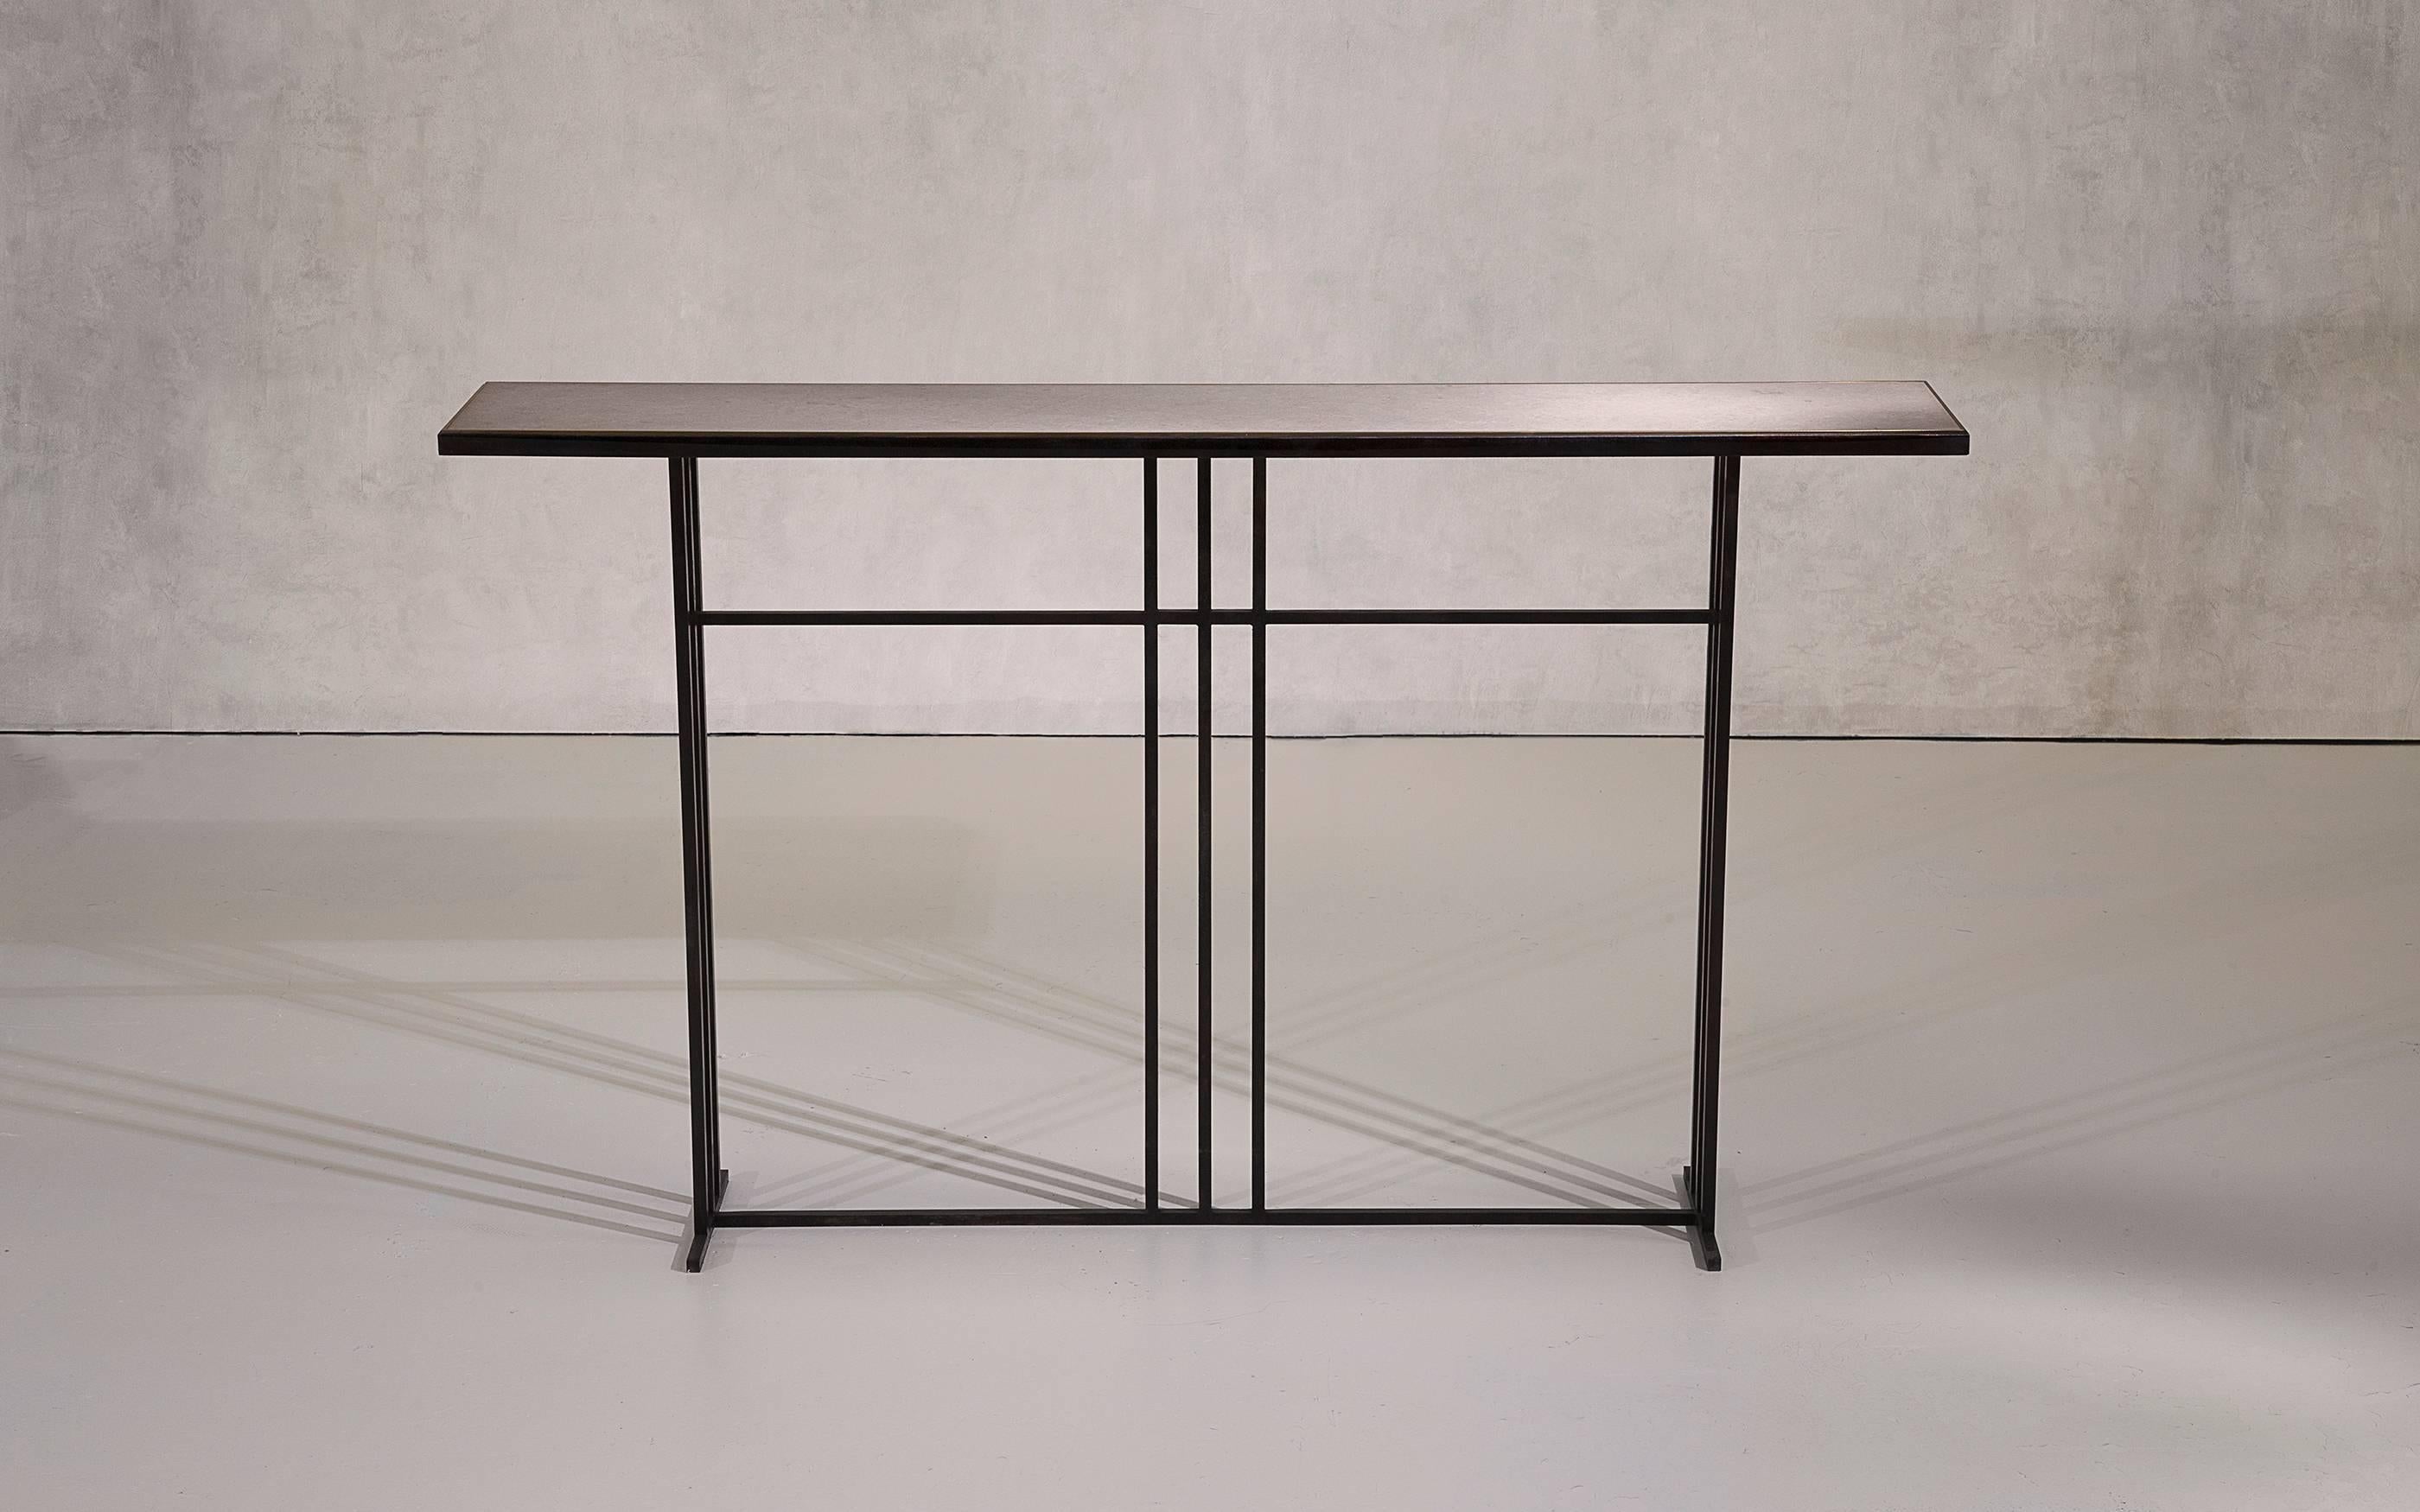 A console table in blackened steel and honed Cumbrian slate, with a polished brass trim. Hand crafted in the North to order. Custom sizes and finishes are available.

Measures: 120cm W x 25cm D x 80cm H. 
Custom sizes available.

Made to order in 12